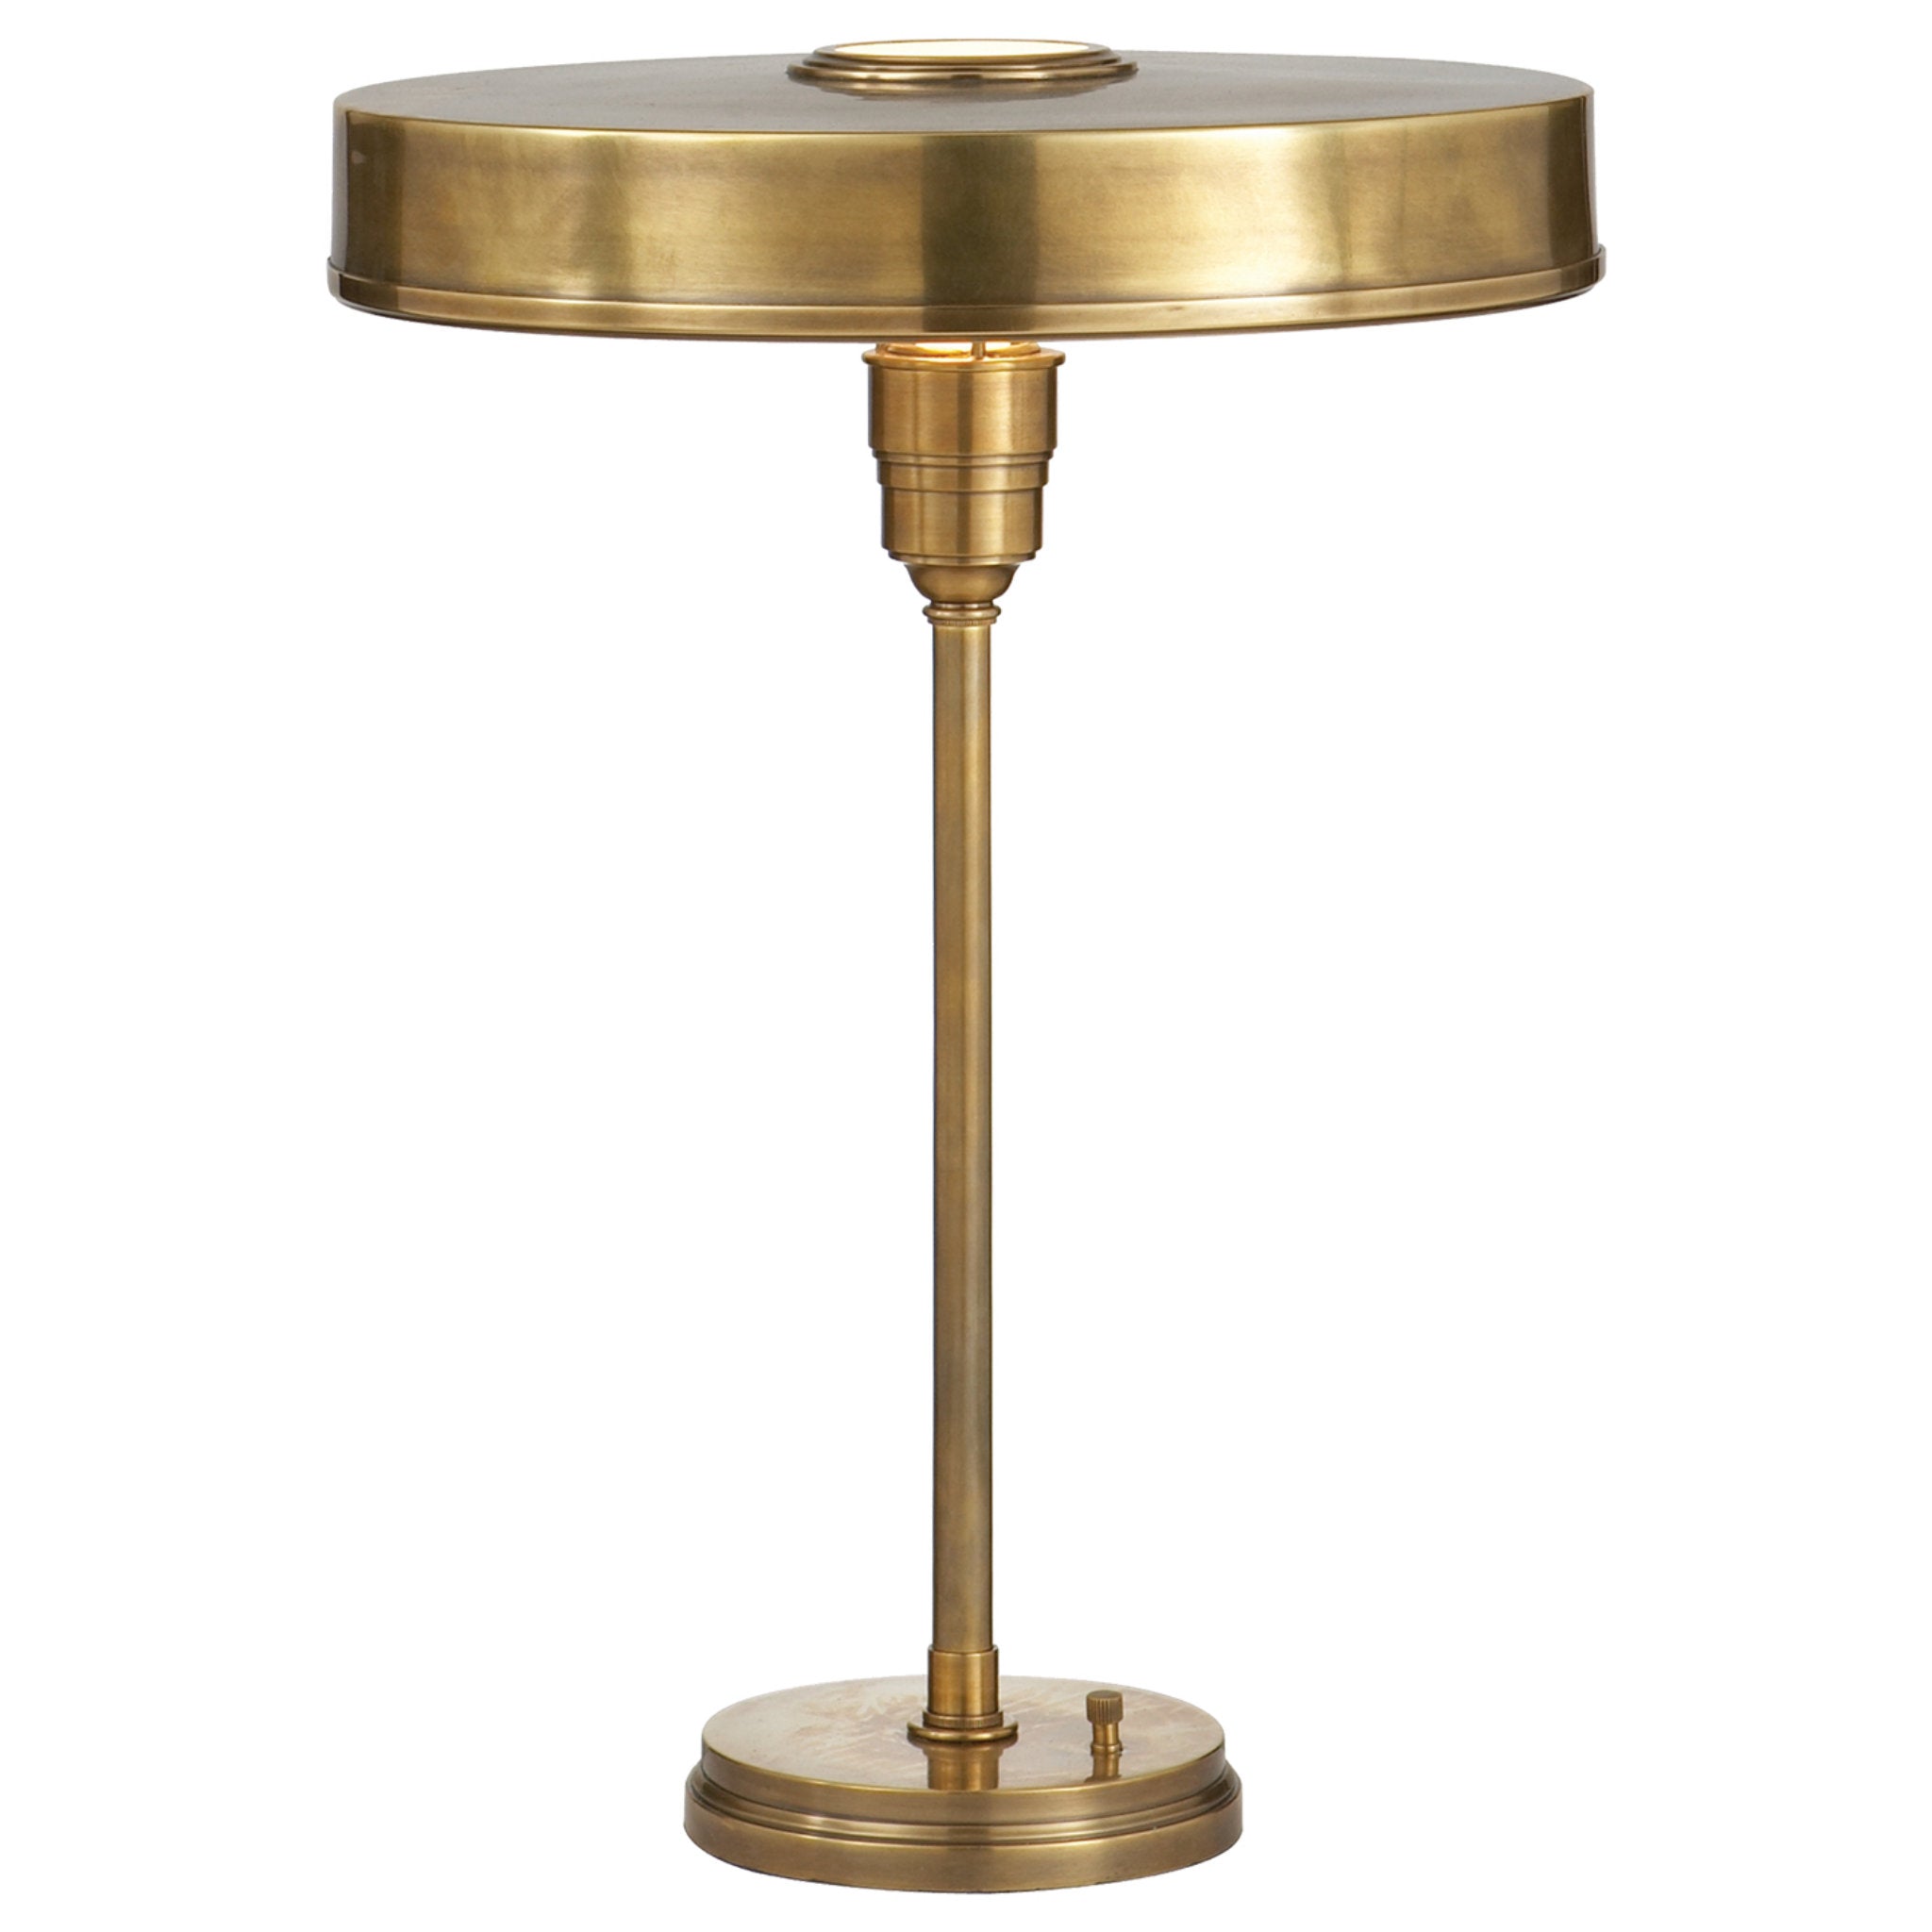 Thomas O'Brien Carlo Table Lamp in Hand-Rubbed Antique Brass